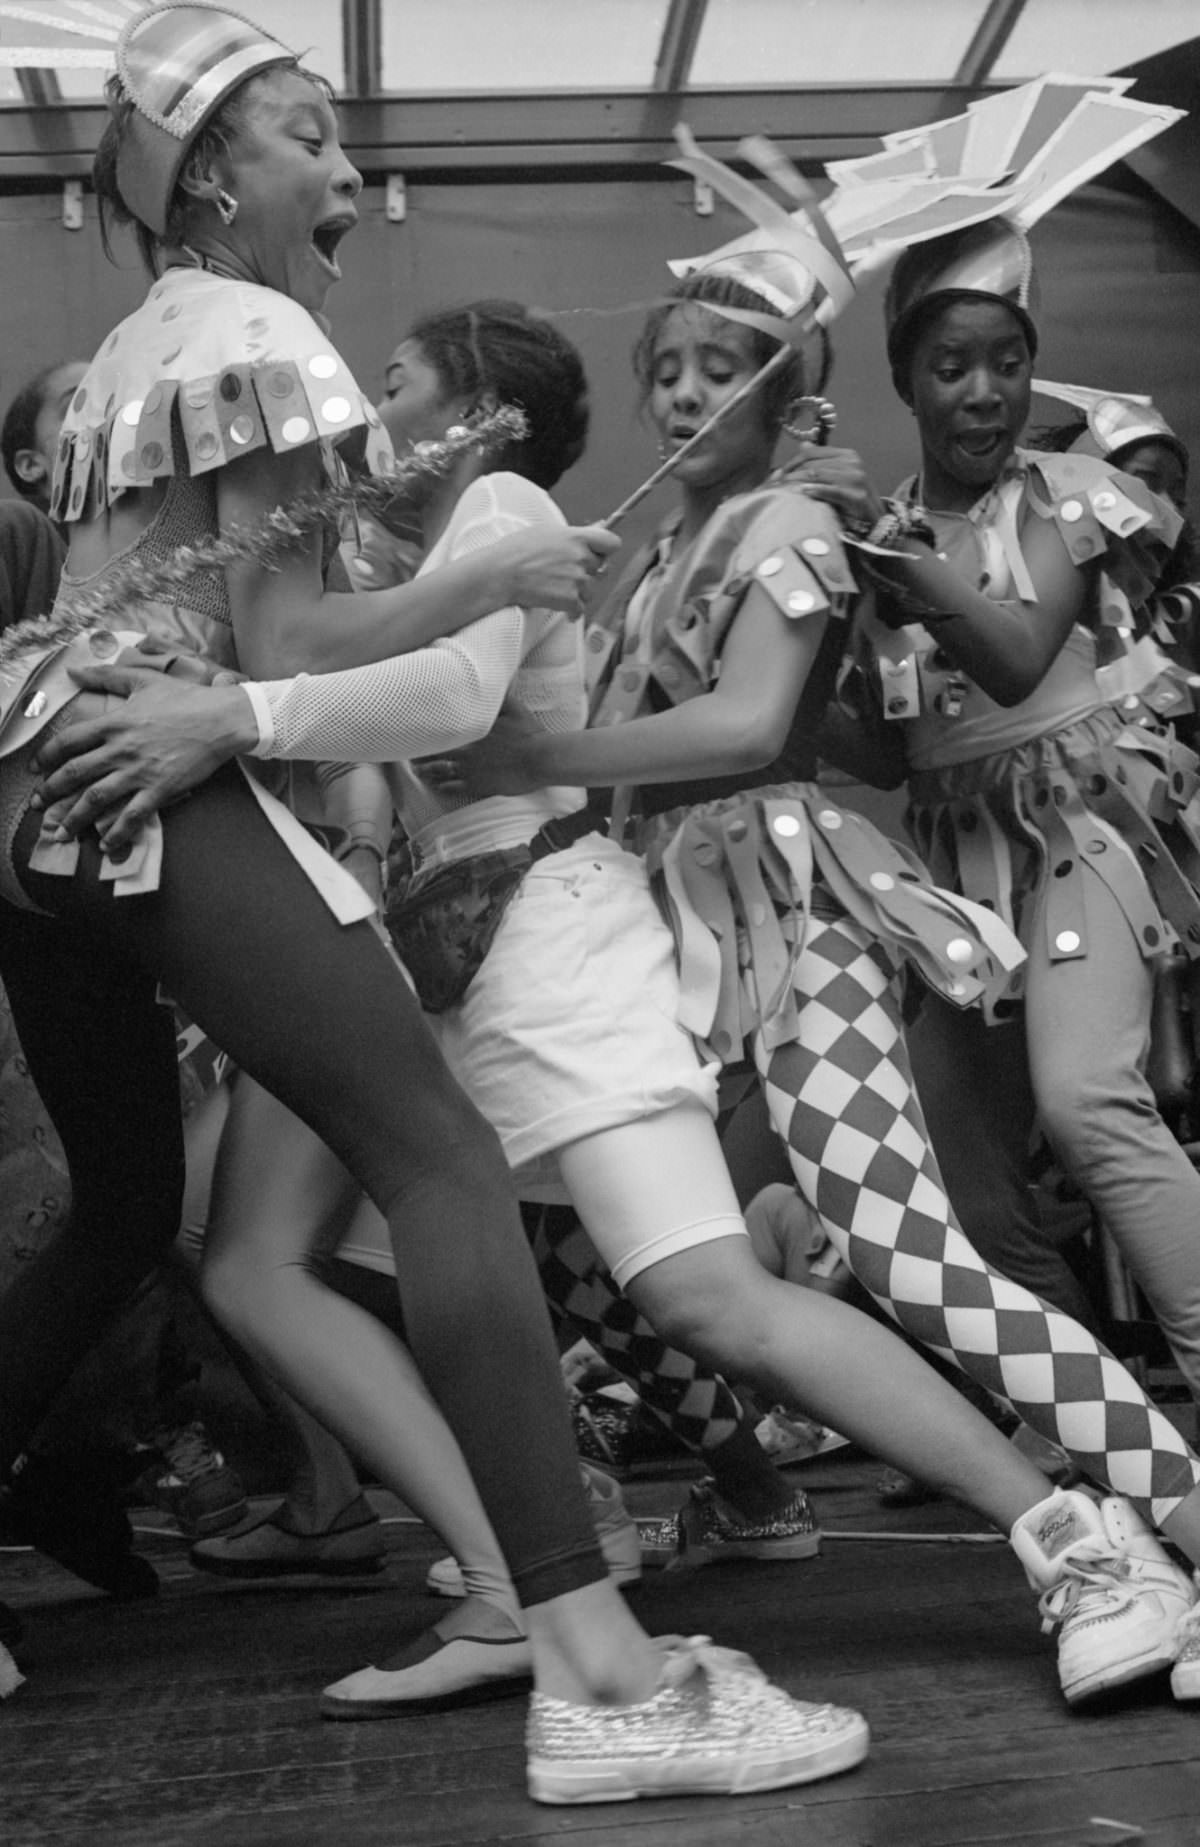 Stunning Photos of the 1992 Notting Hill Carnival that show the Celebration of Caribbean Culture